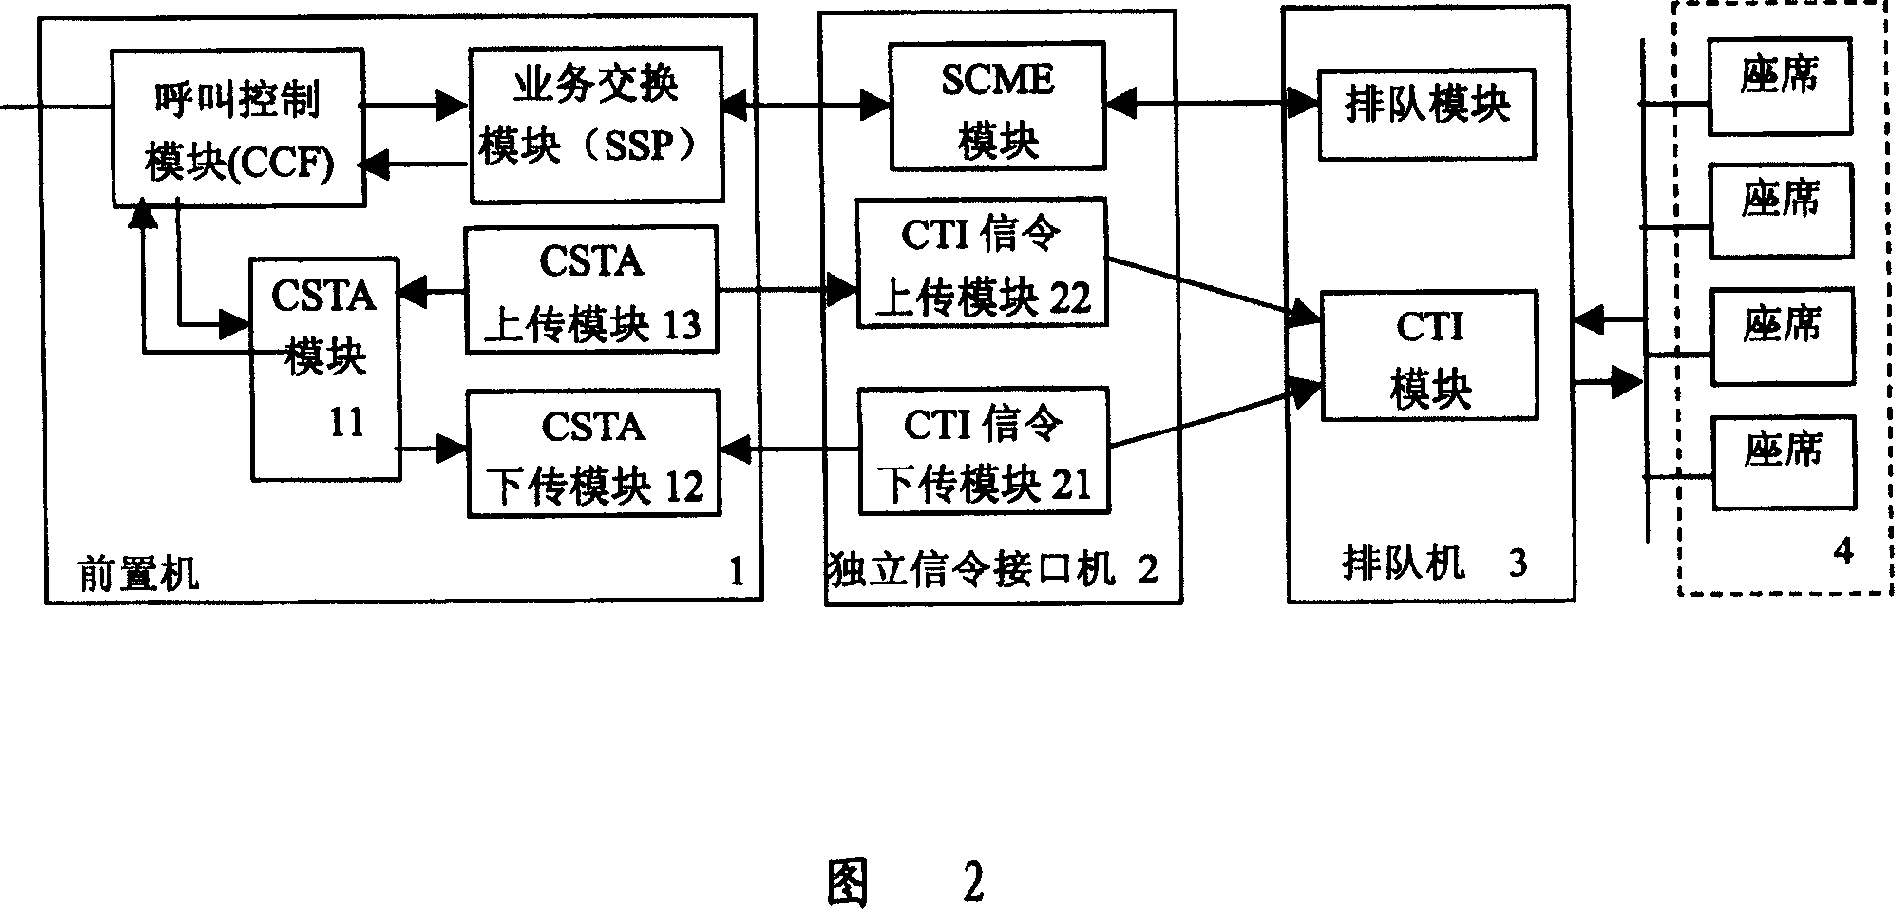 Implementing method for countrywide interconnection system for call center